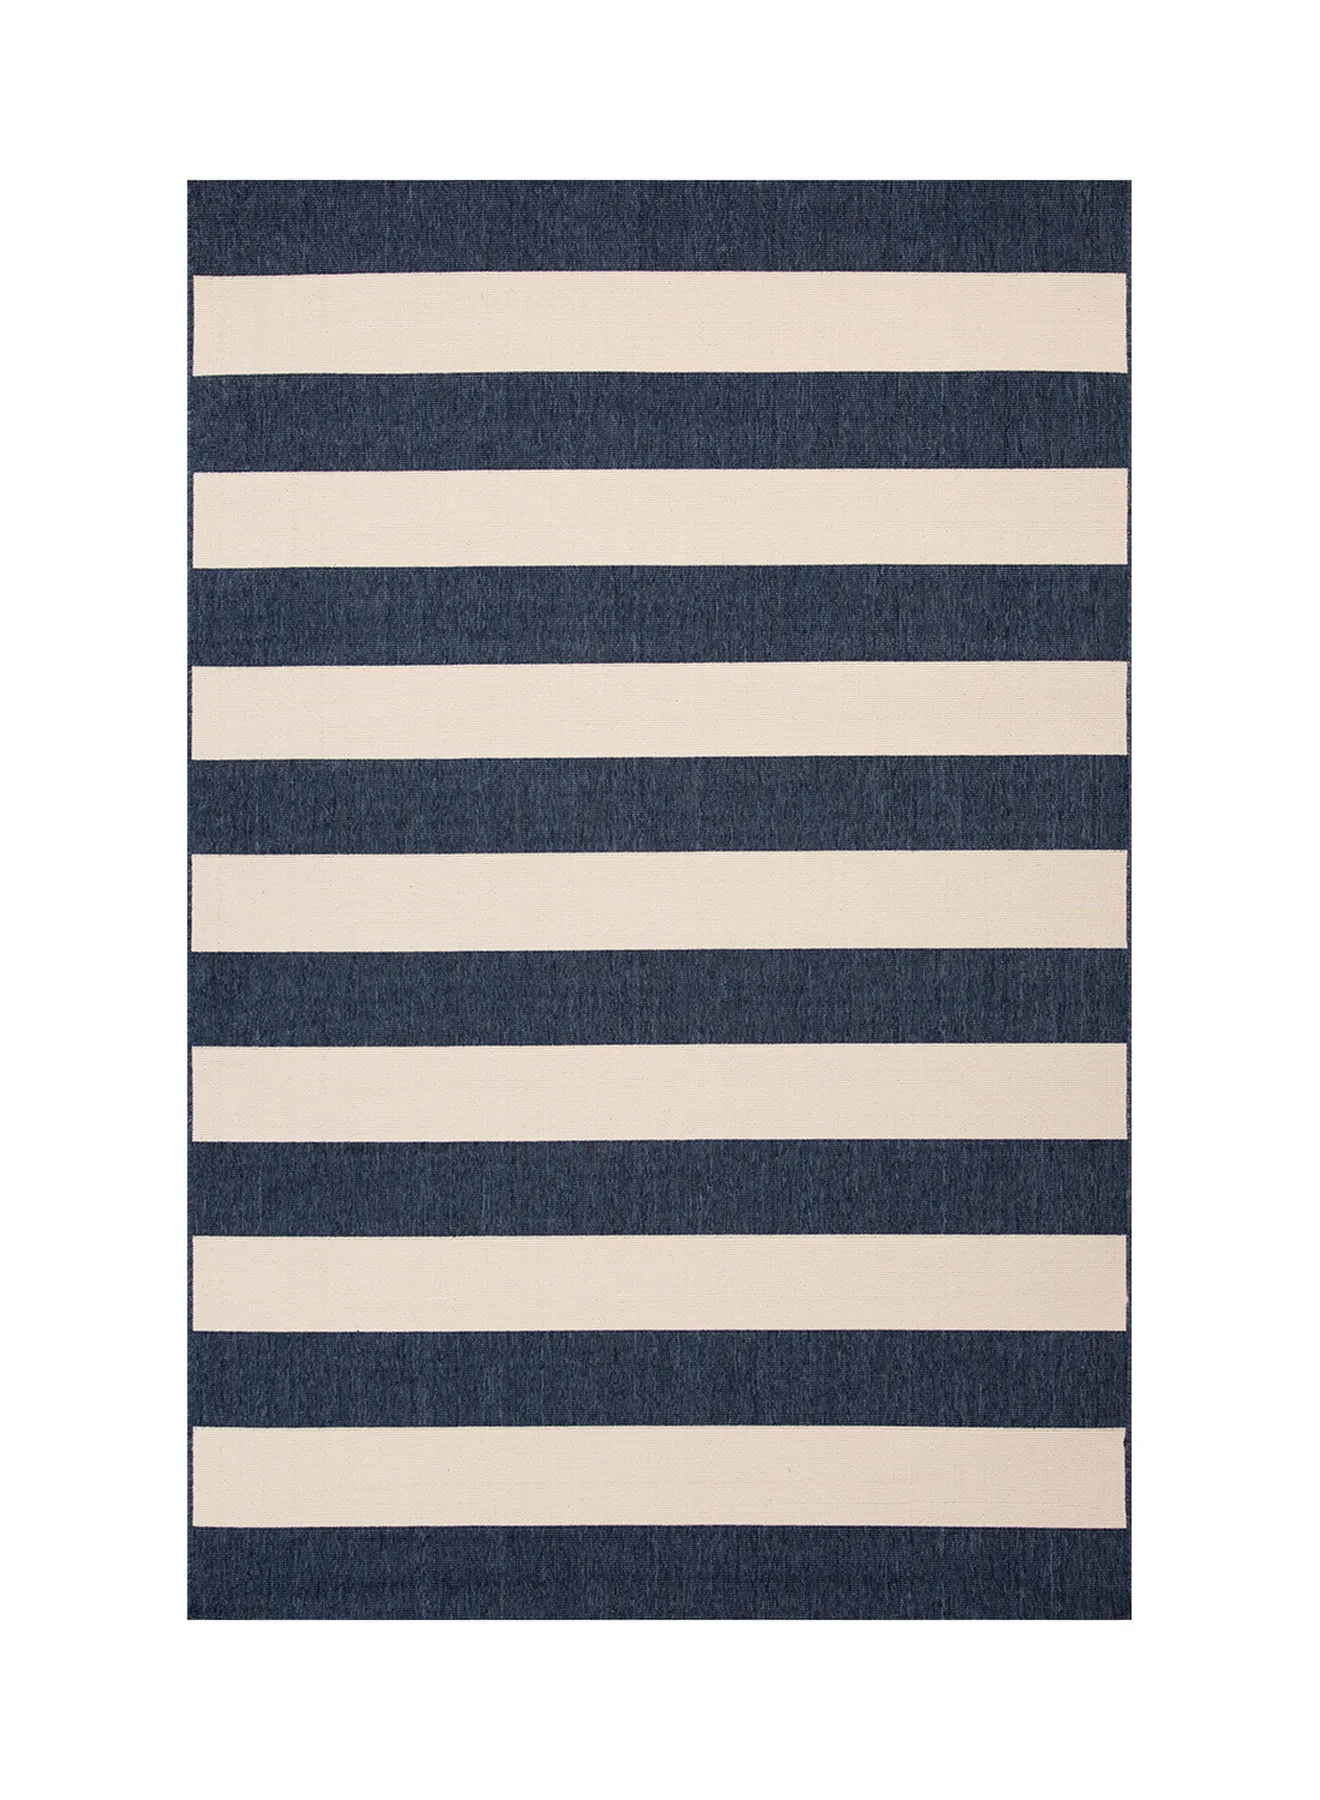 ebb & flow L. Tributary Outdoor Unique Luxury Quality Material Carpet For The Perfect Stylish Home 4465B Blue/White 160 x 235cm